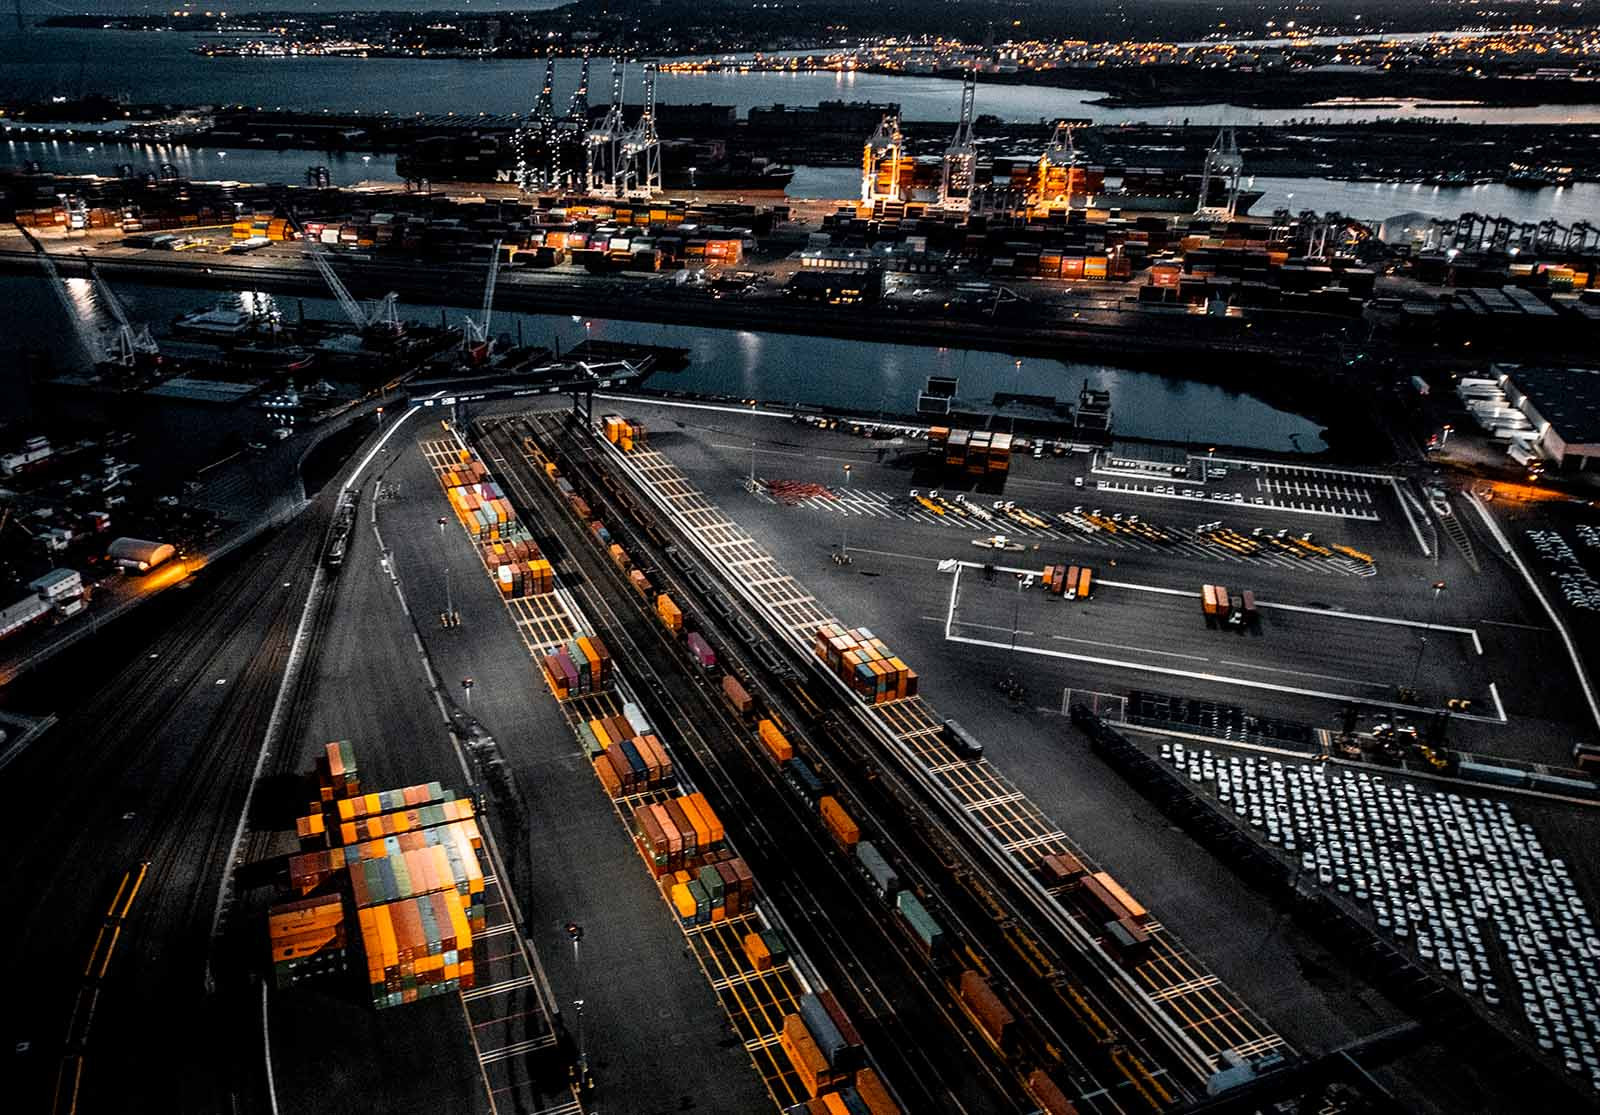 Aerial photo of NY/NJ shipyard full of freight containers